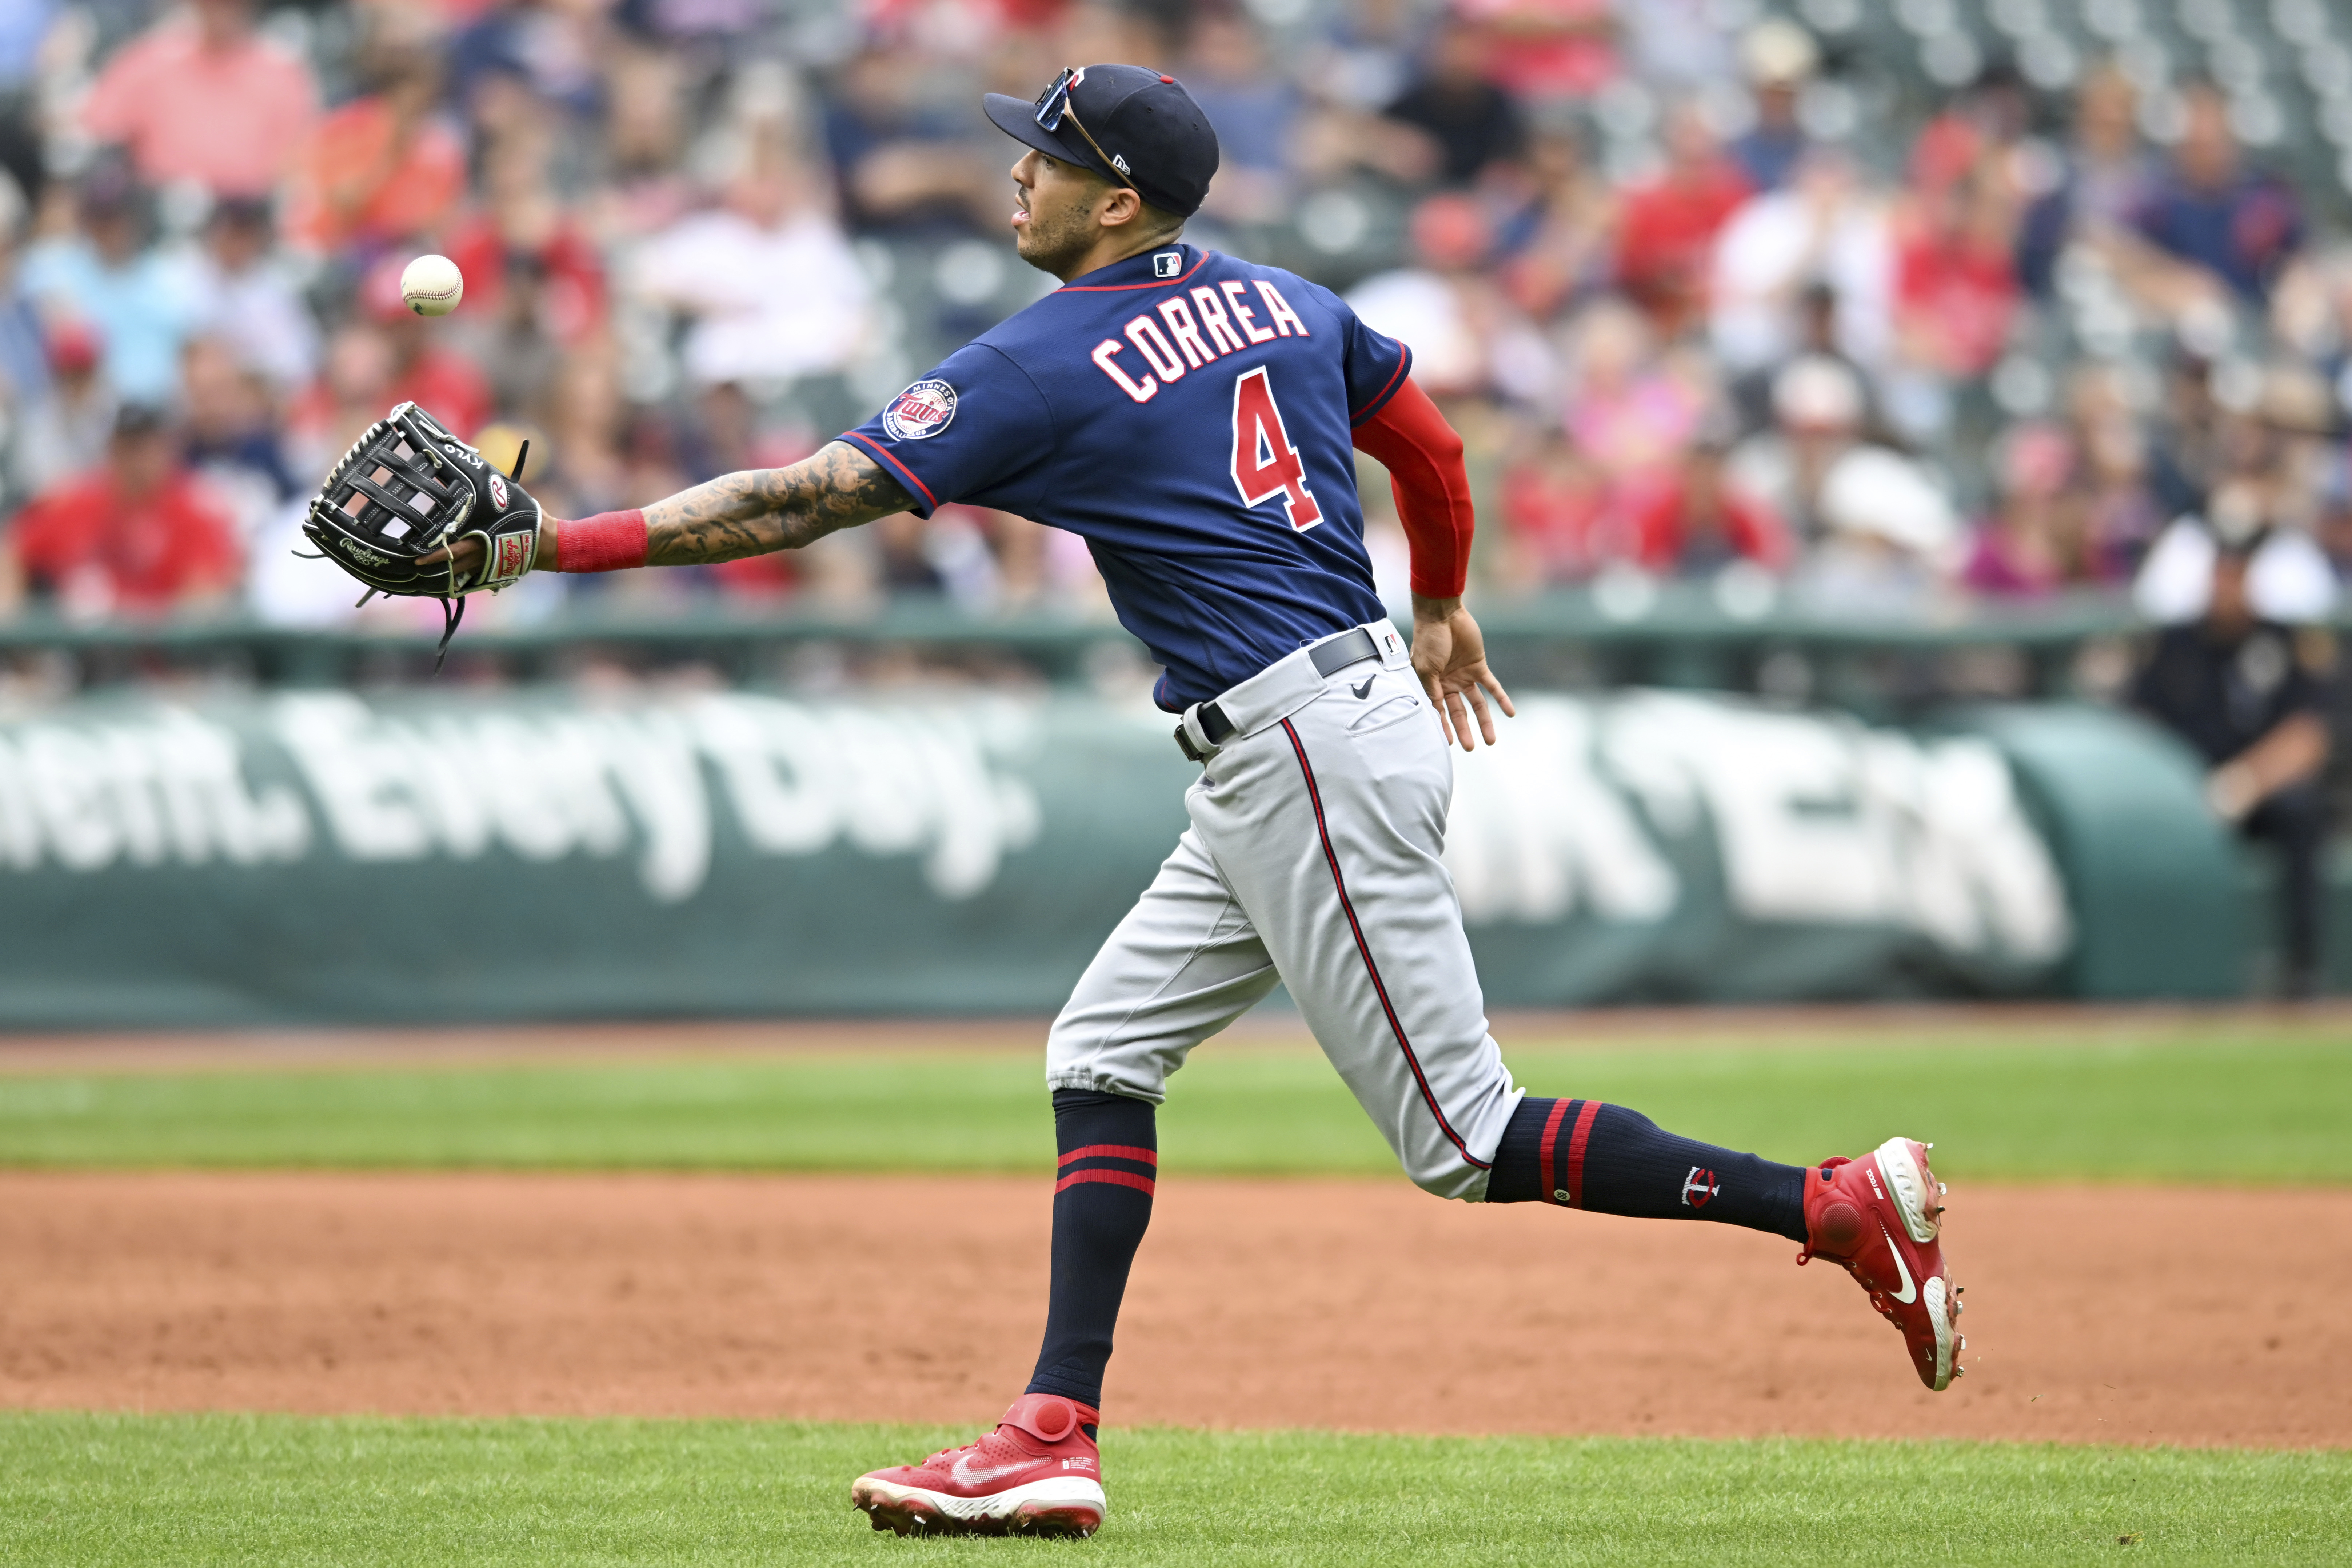 May 30, 2021: Carlos Correa (1) makes a throw to first base for